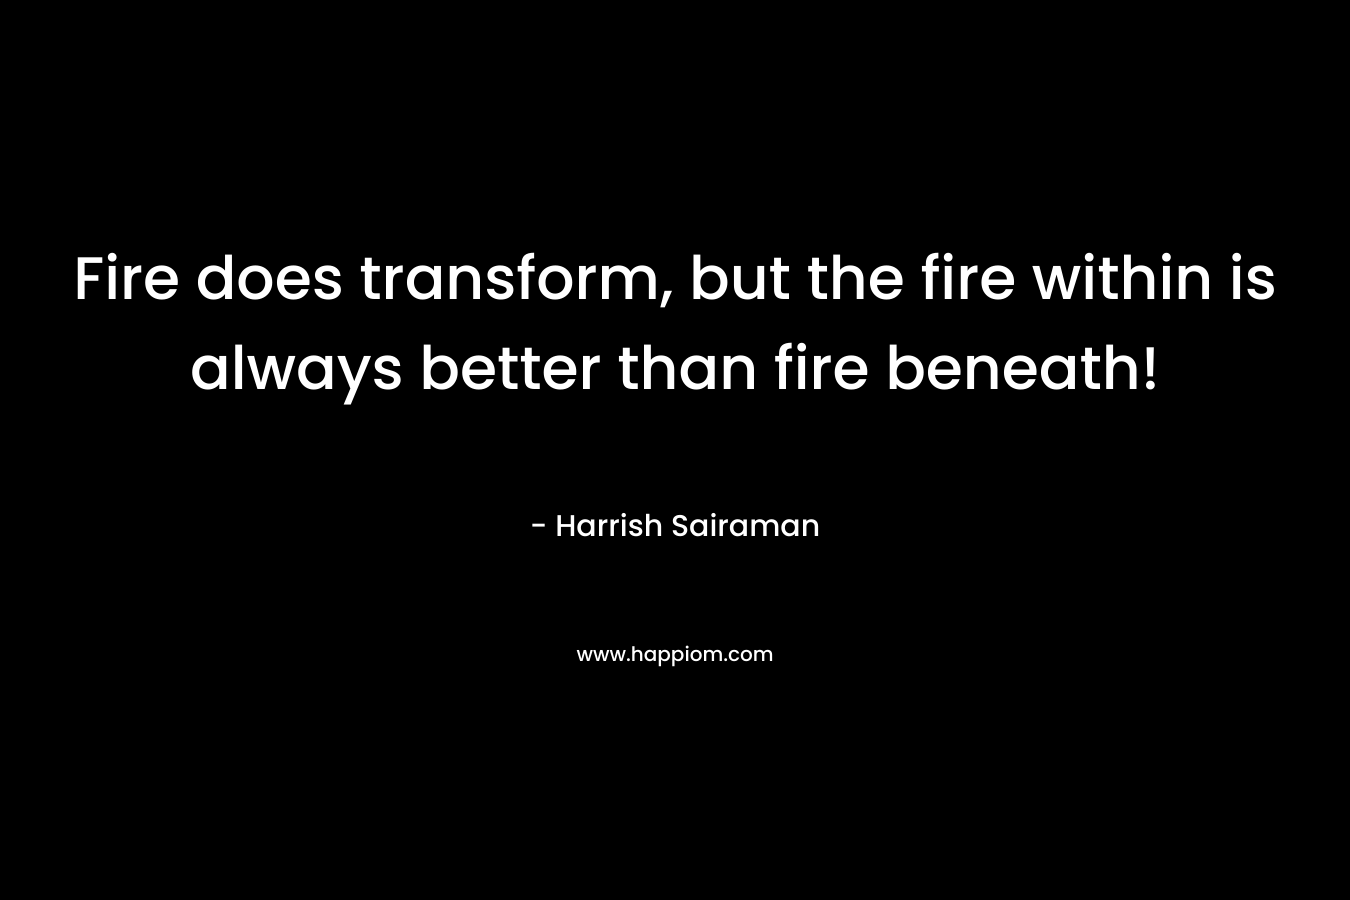 Fire does transform, but the fire within is always better than fire beneath! – Harrish Sairaman